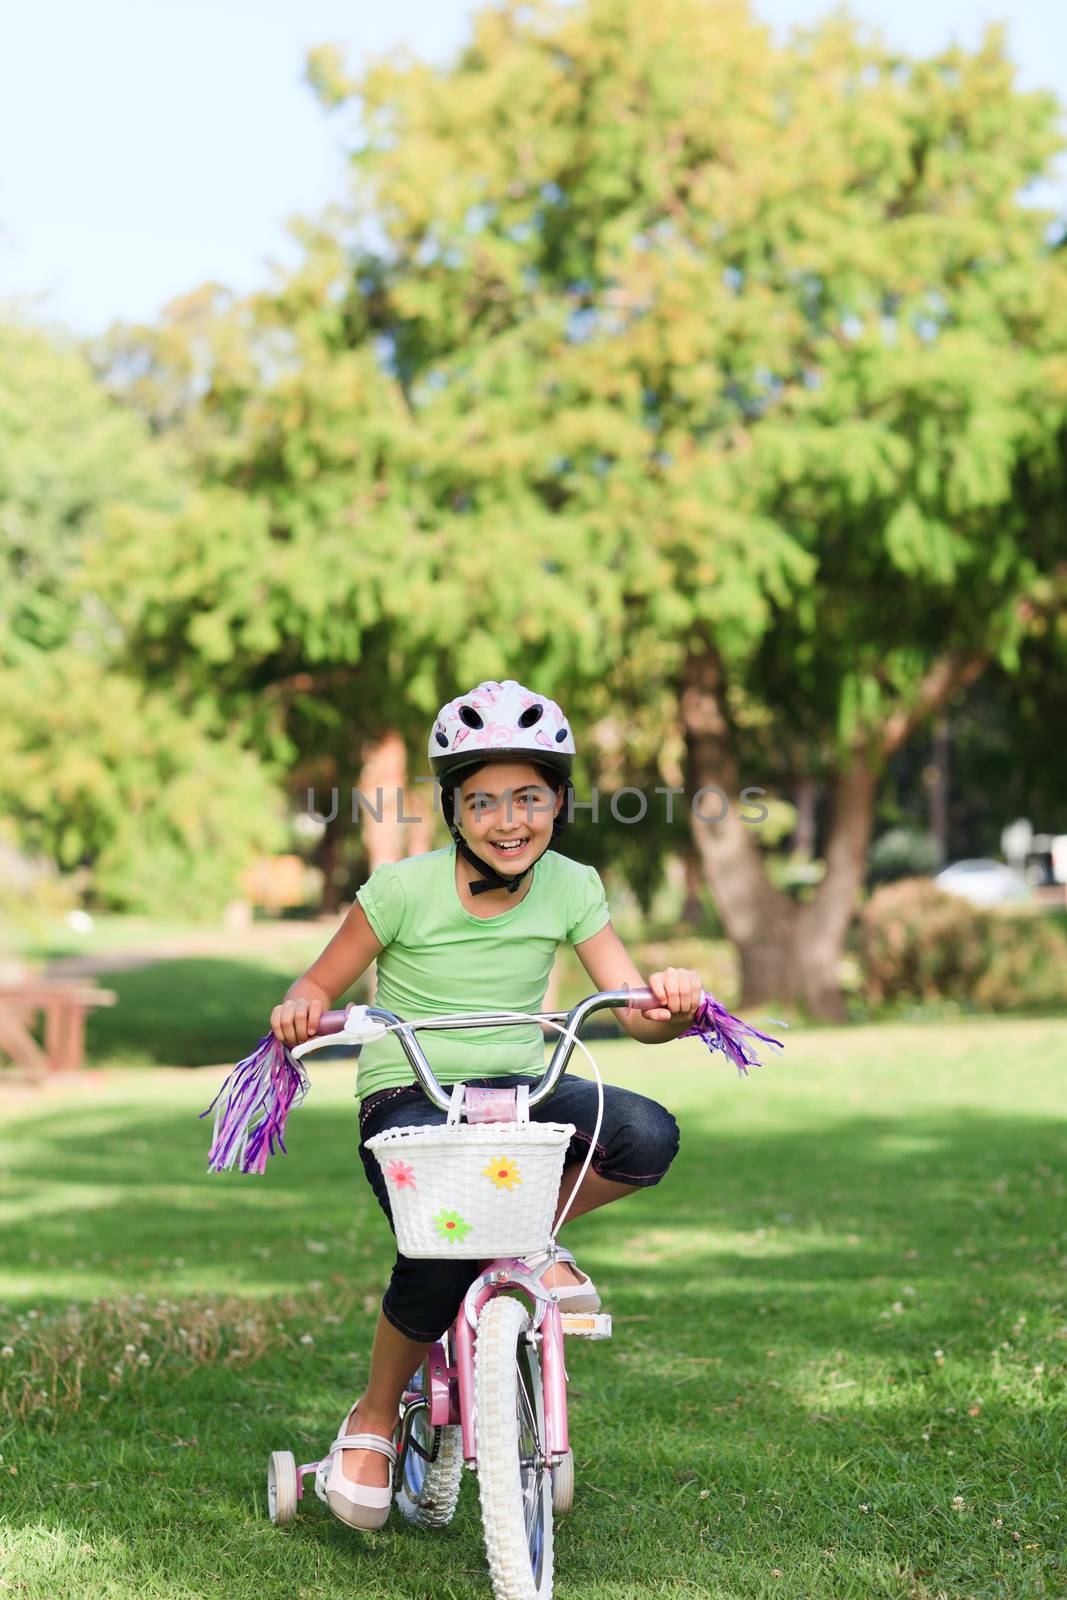 Little girl with her bike in a park during the summer